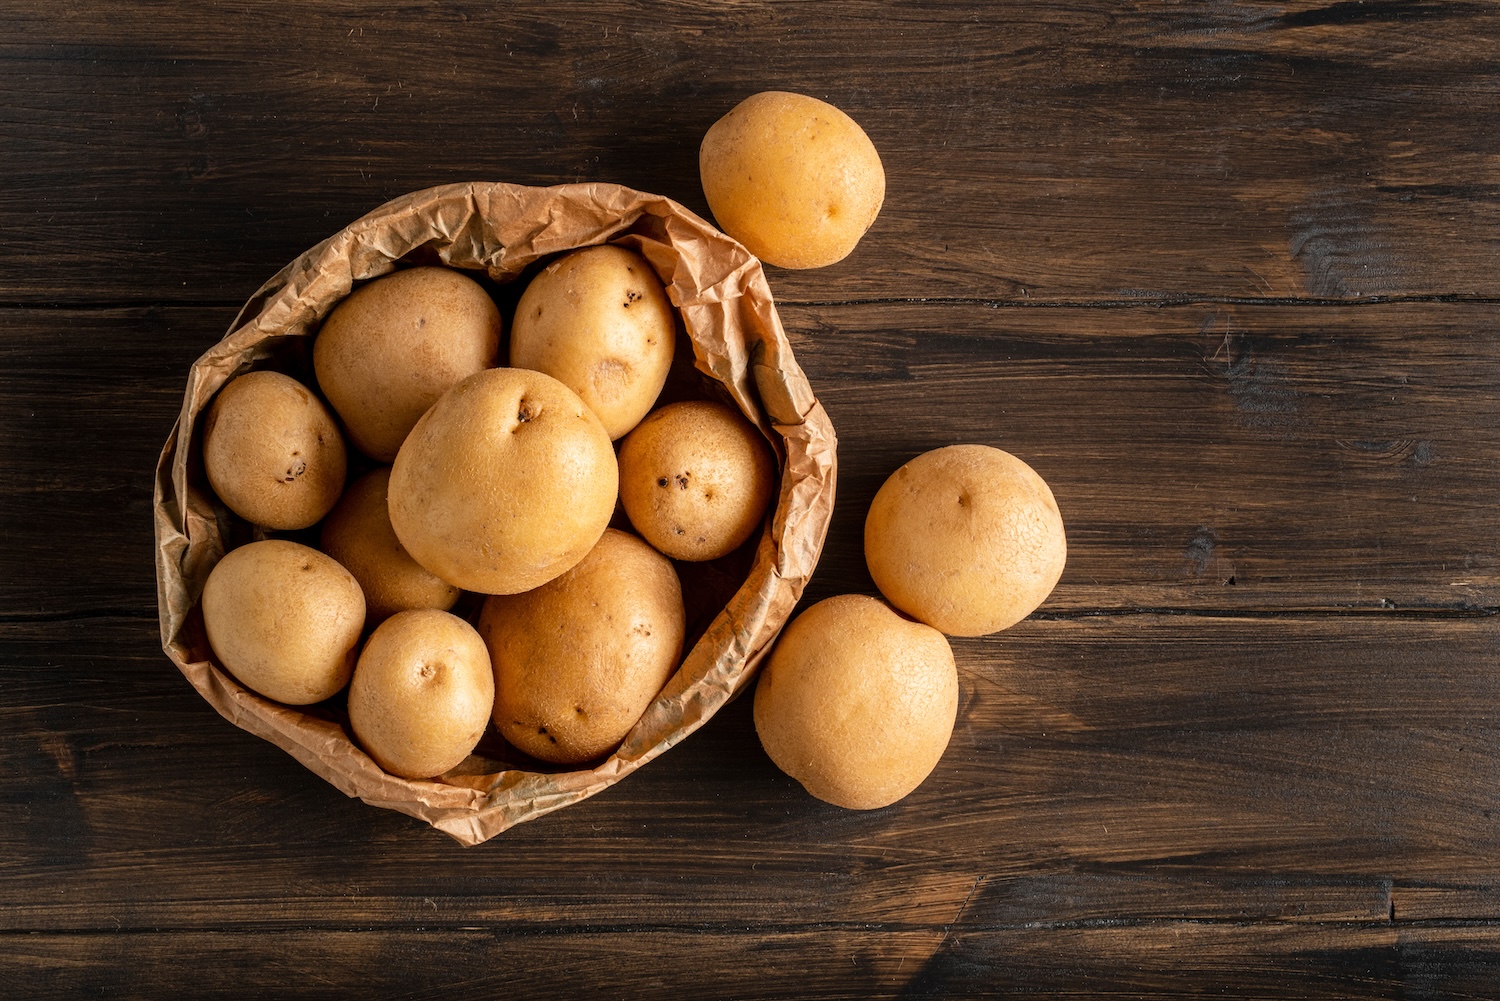 potatoes in a paper bag - how to store fruits and vegetables so it lasts longer